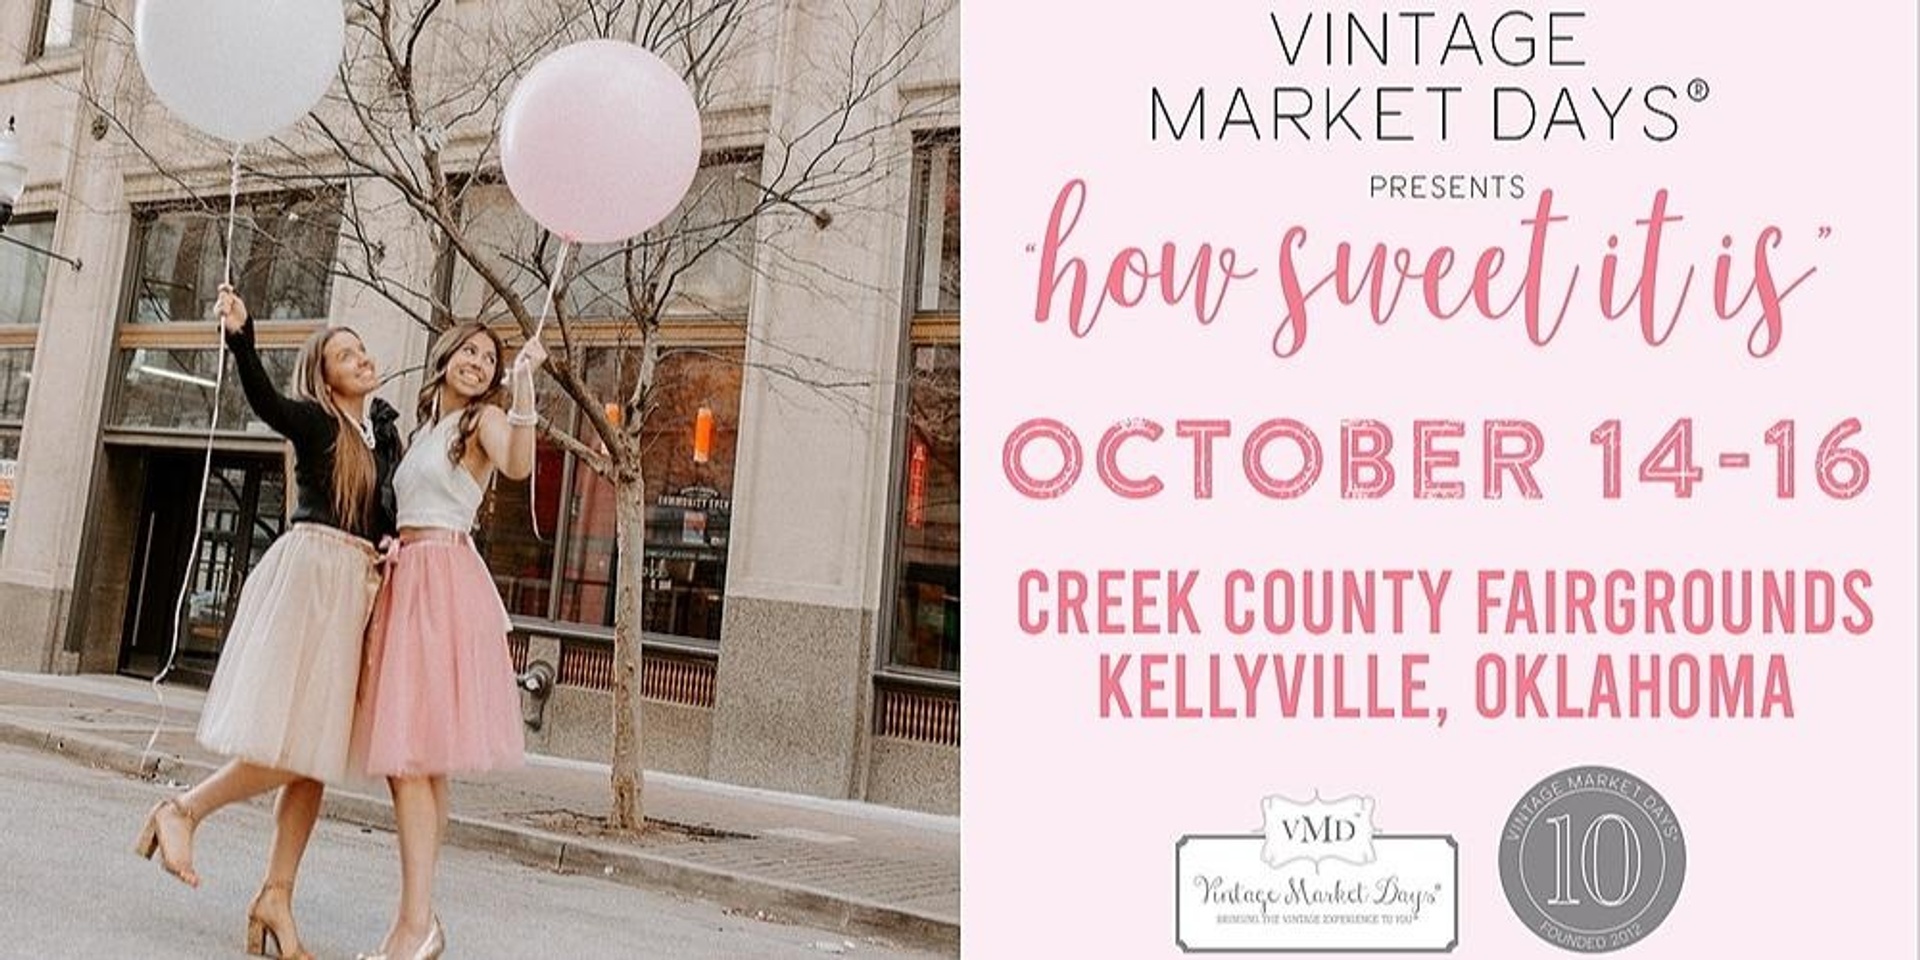 Vintage Market Days® - "How Sweet It Is"